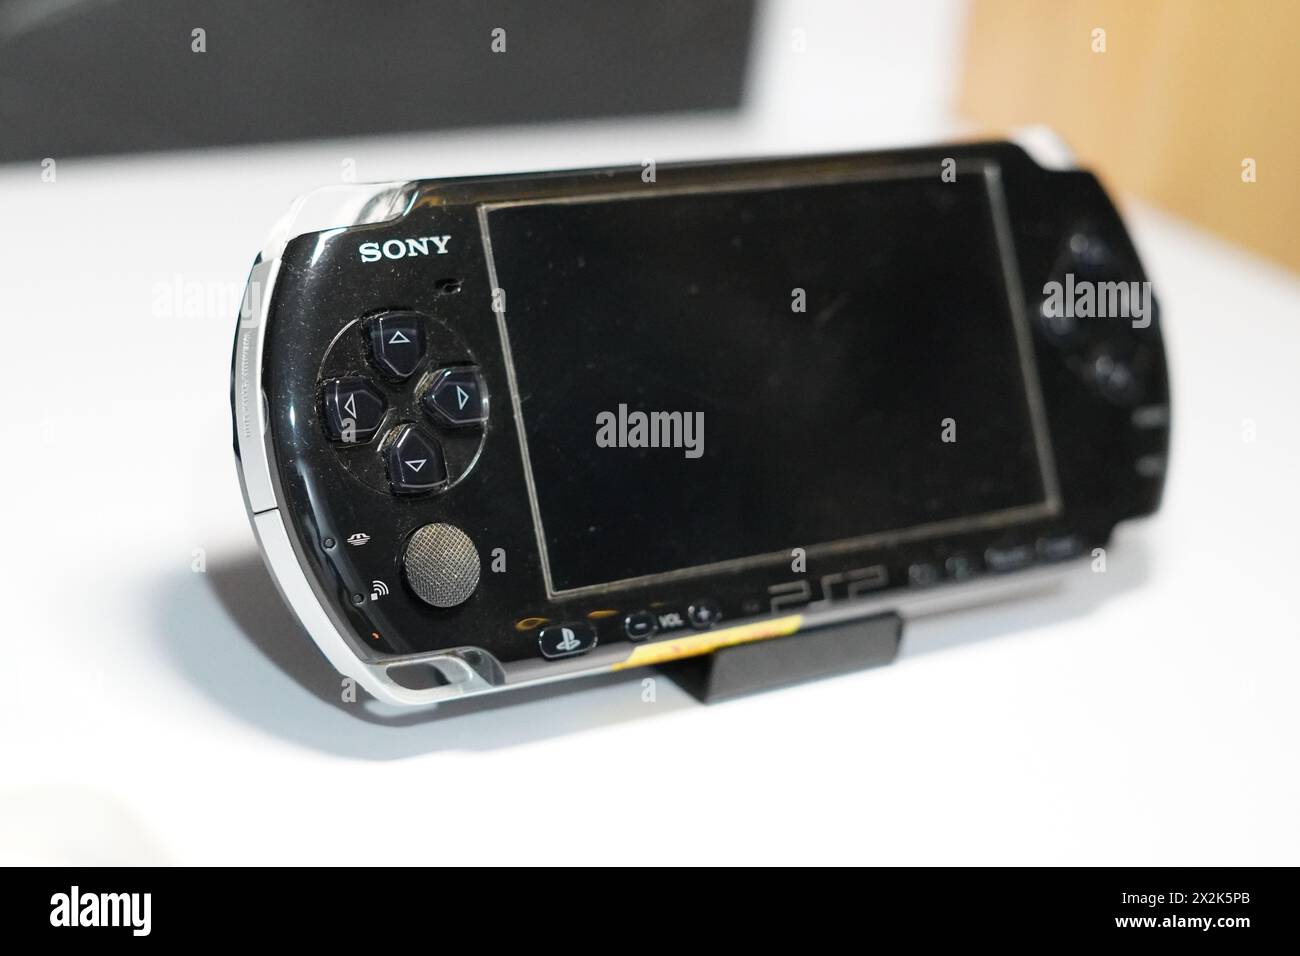 A black handheld game console from Sony called PSP on a white table Stock Photo